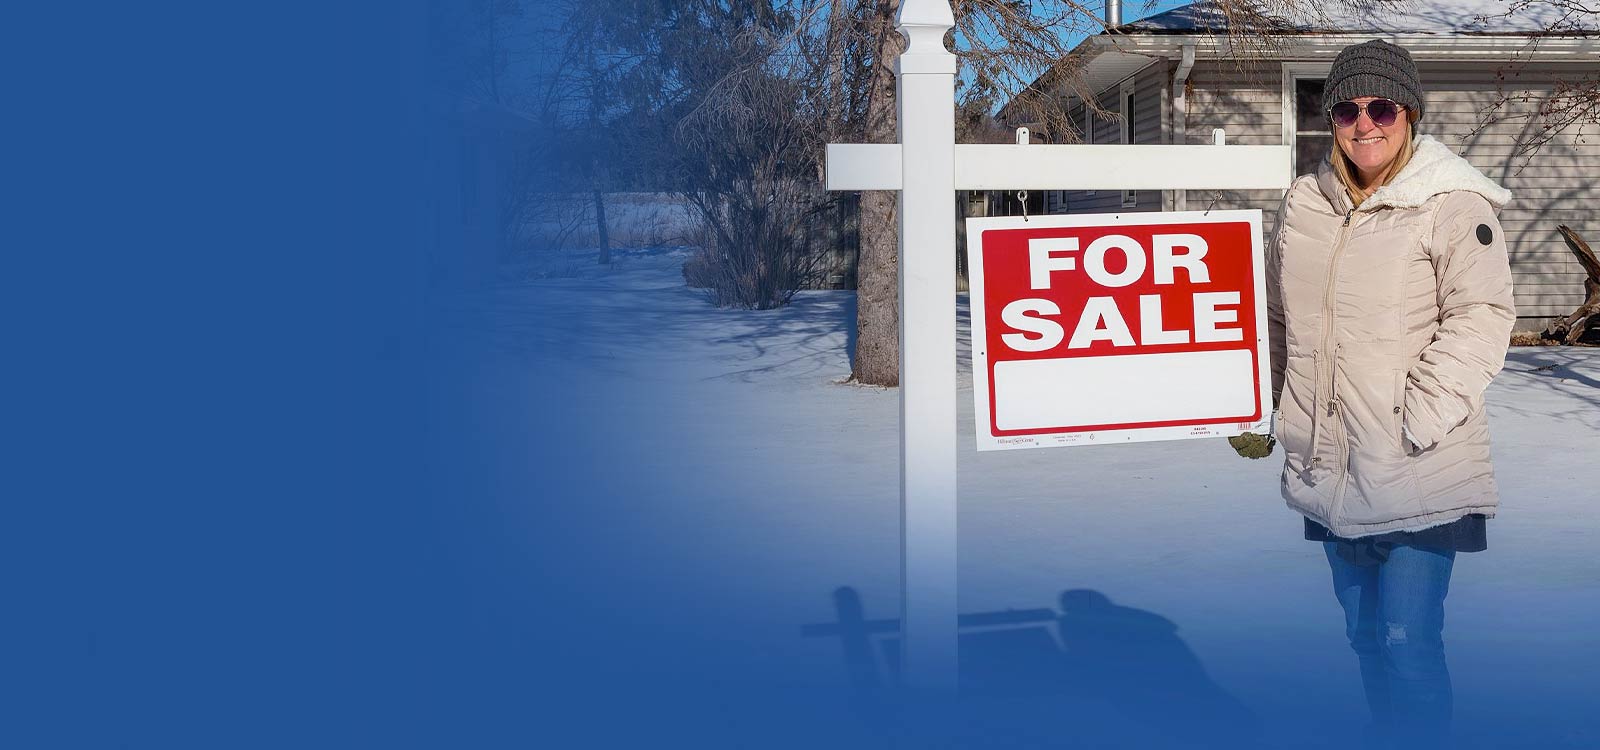 Woman standing in front of for sale sign